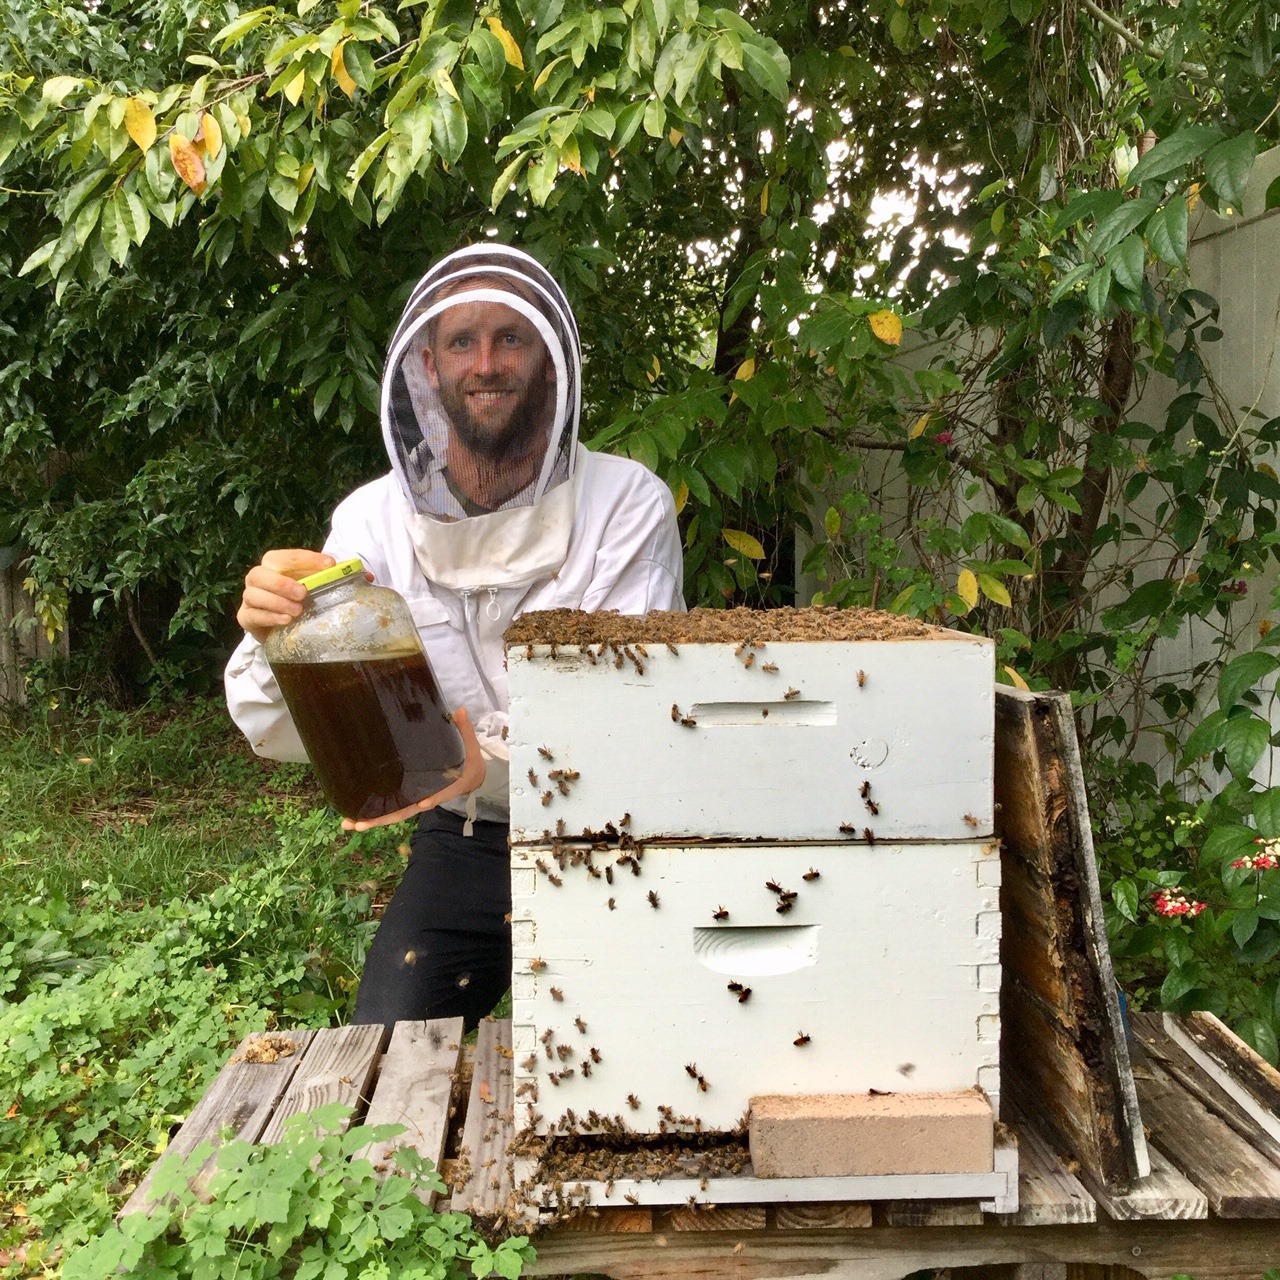 “Today is day 357 of growing and foraging 100% of my food and I’ve got a problem! TOO MUCH HONEY!”